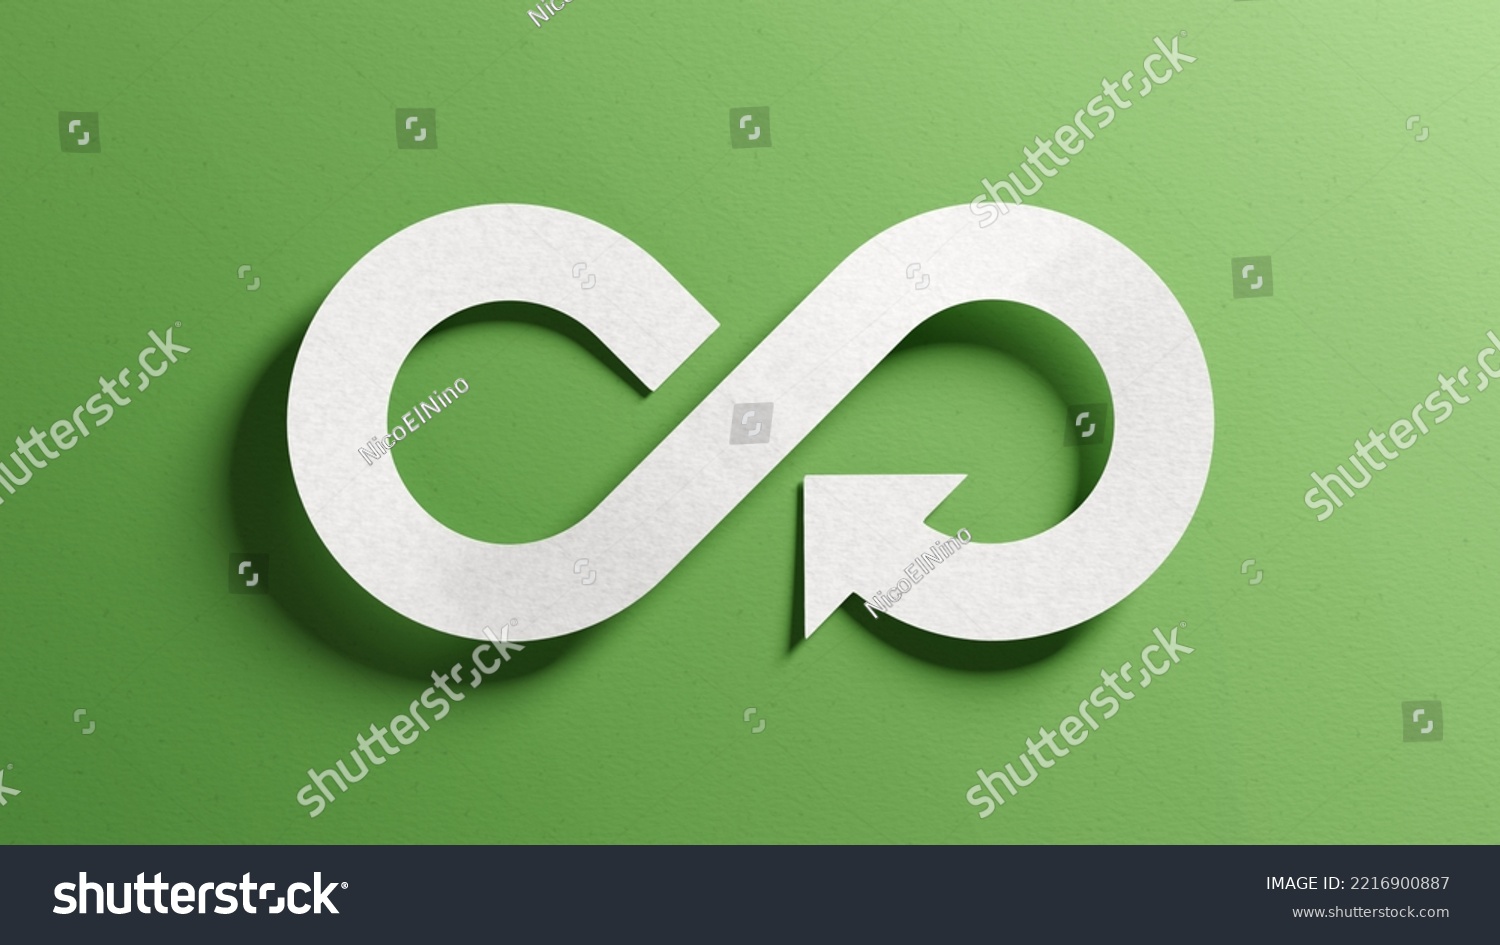 Circular economy to reduce waste by reusing, repairing, recycling products and materials. Ecology, nature preservation, sustainable development, green business concept. Infinity icon symbol paper. #2216900887